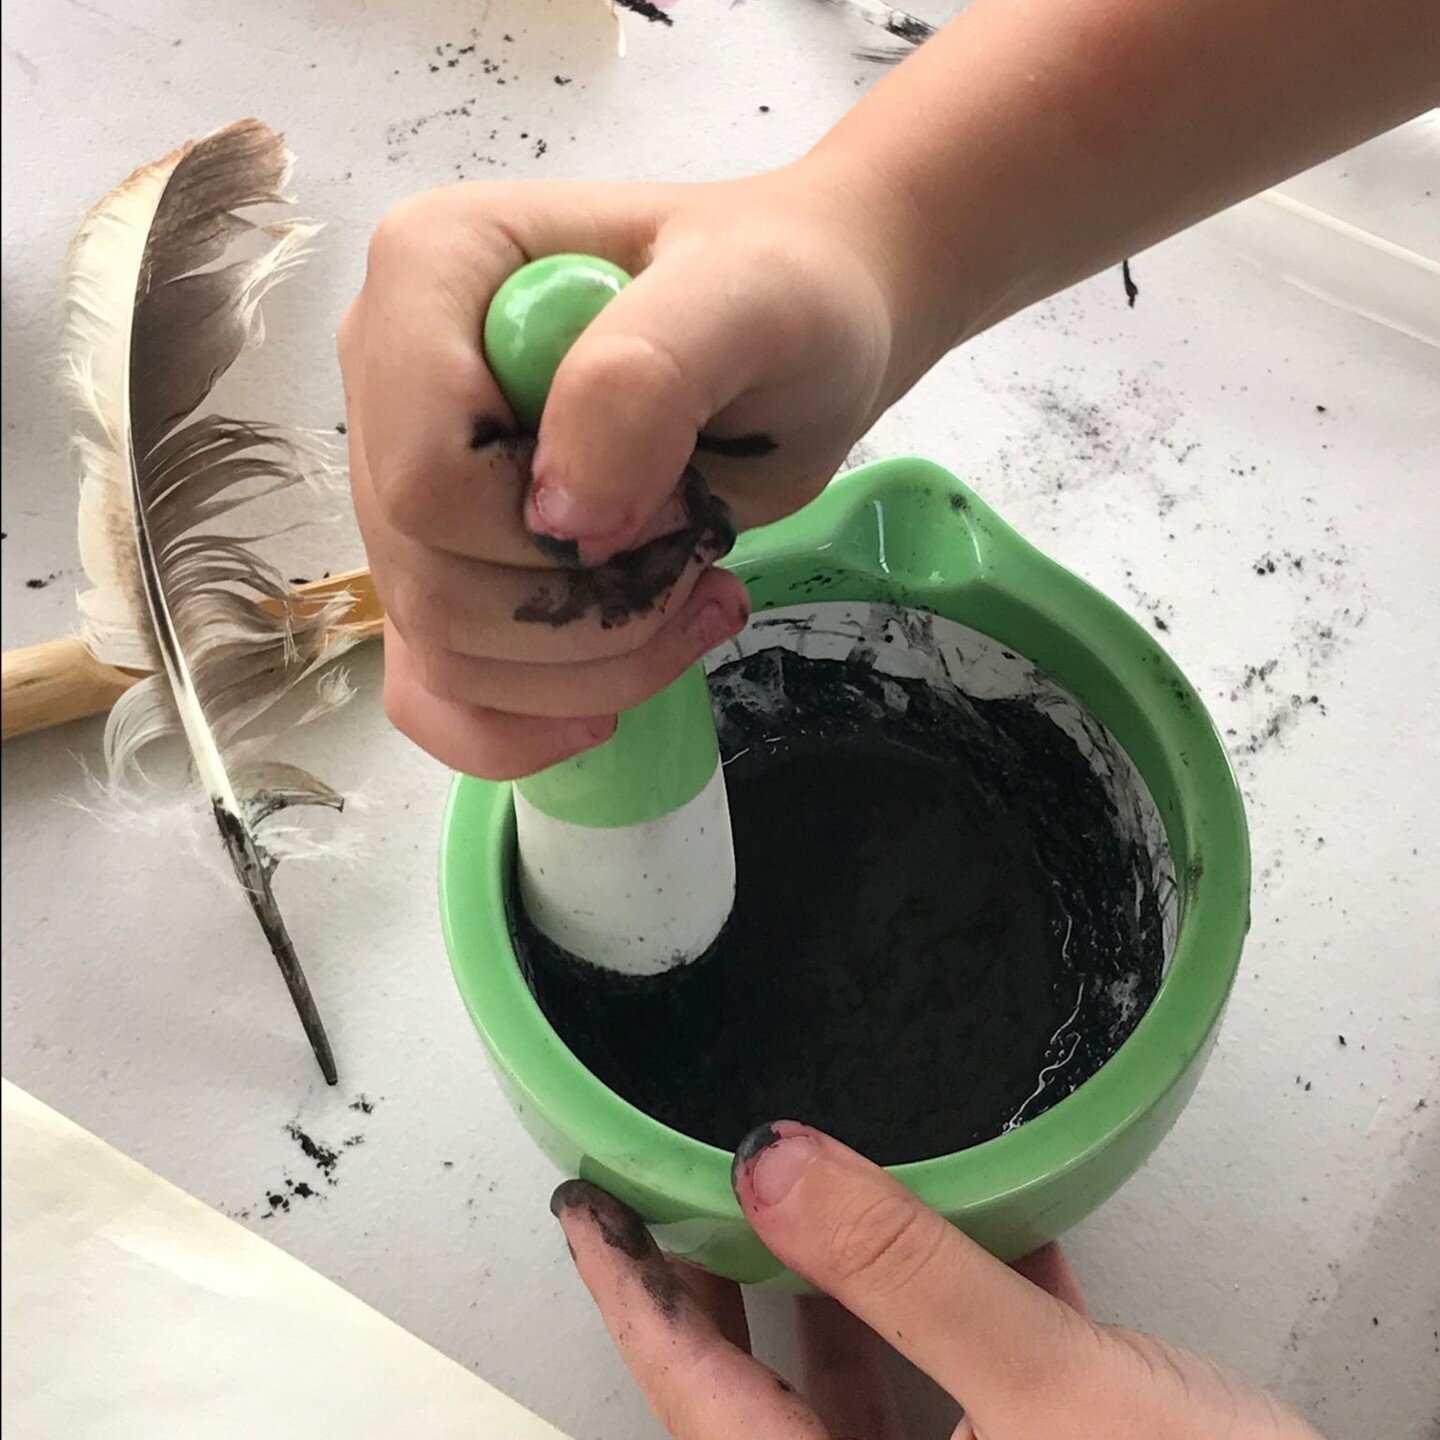 Term Two begins so let's get Arty after school! 

The cooler days are creeping in as Term Two begins. Some after school creating will warm the heart and mind! MAKA &amp; Artynoons sessions now available!